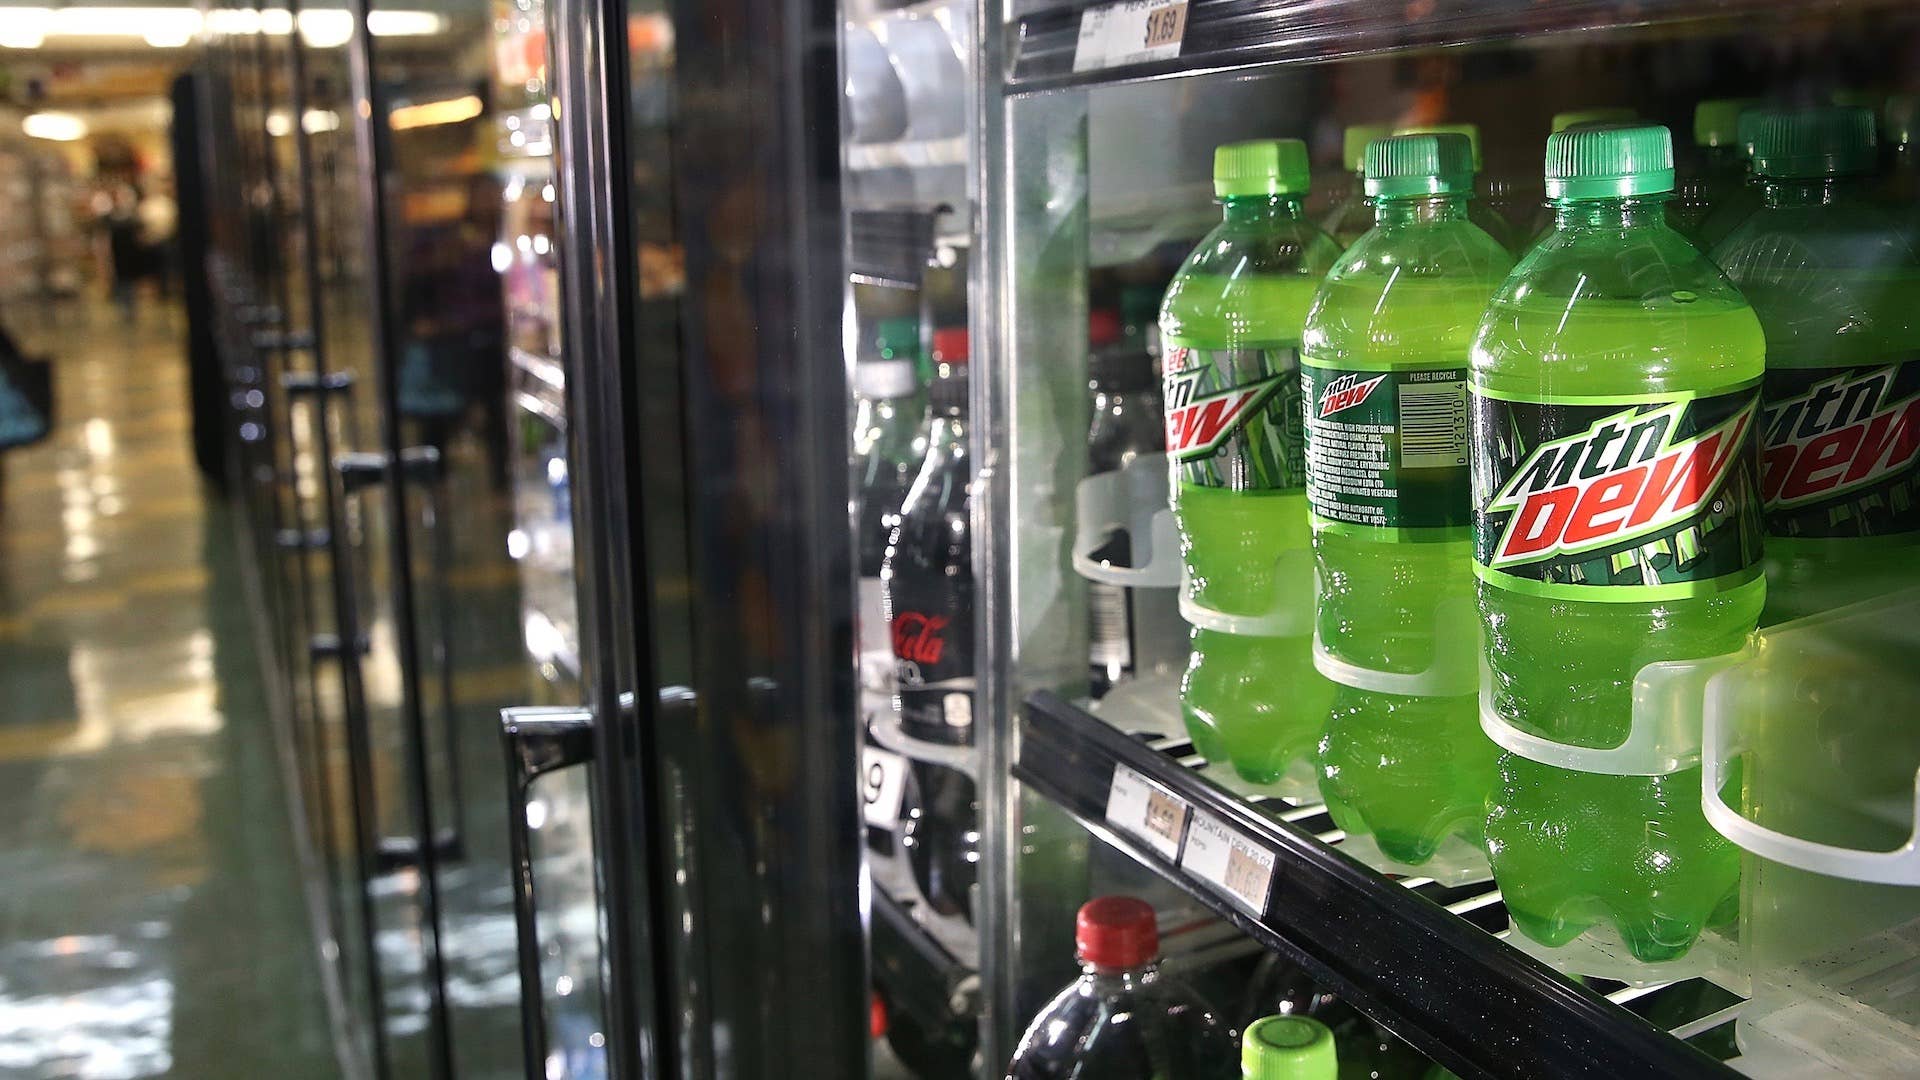 Bottles of Mountain Dew are displayed in a cooler